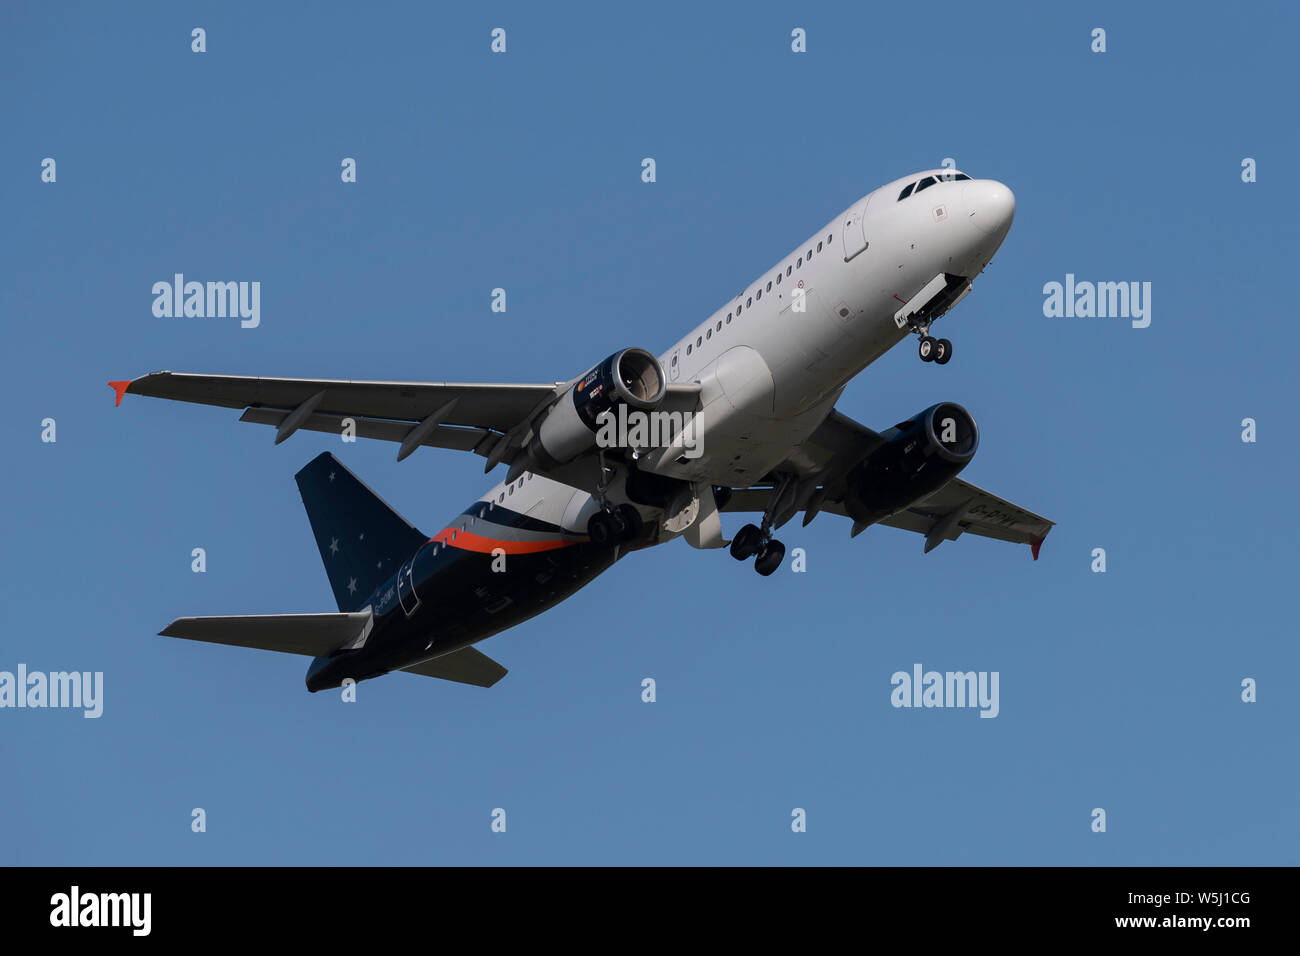 A Titan Airways Airbus A320-200 takes off from Manchester International Airport (Editorial use only) Stock Photo